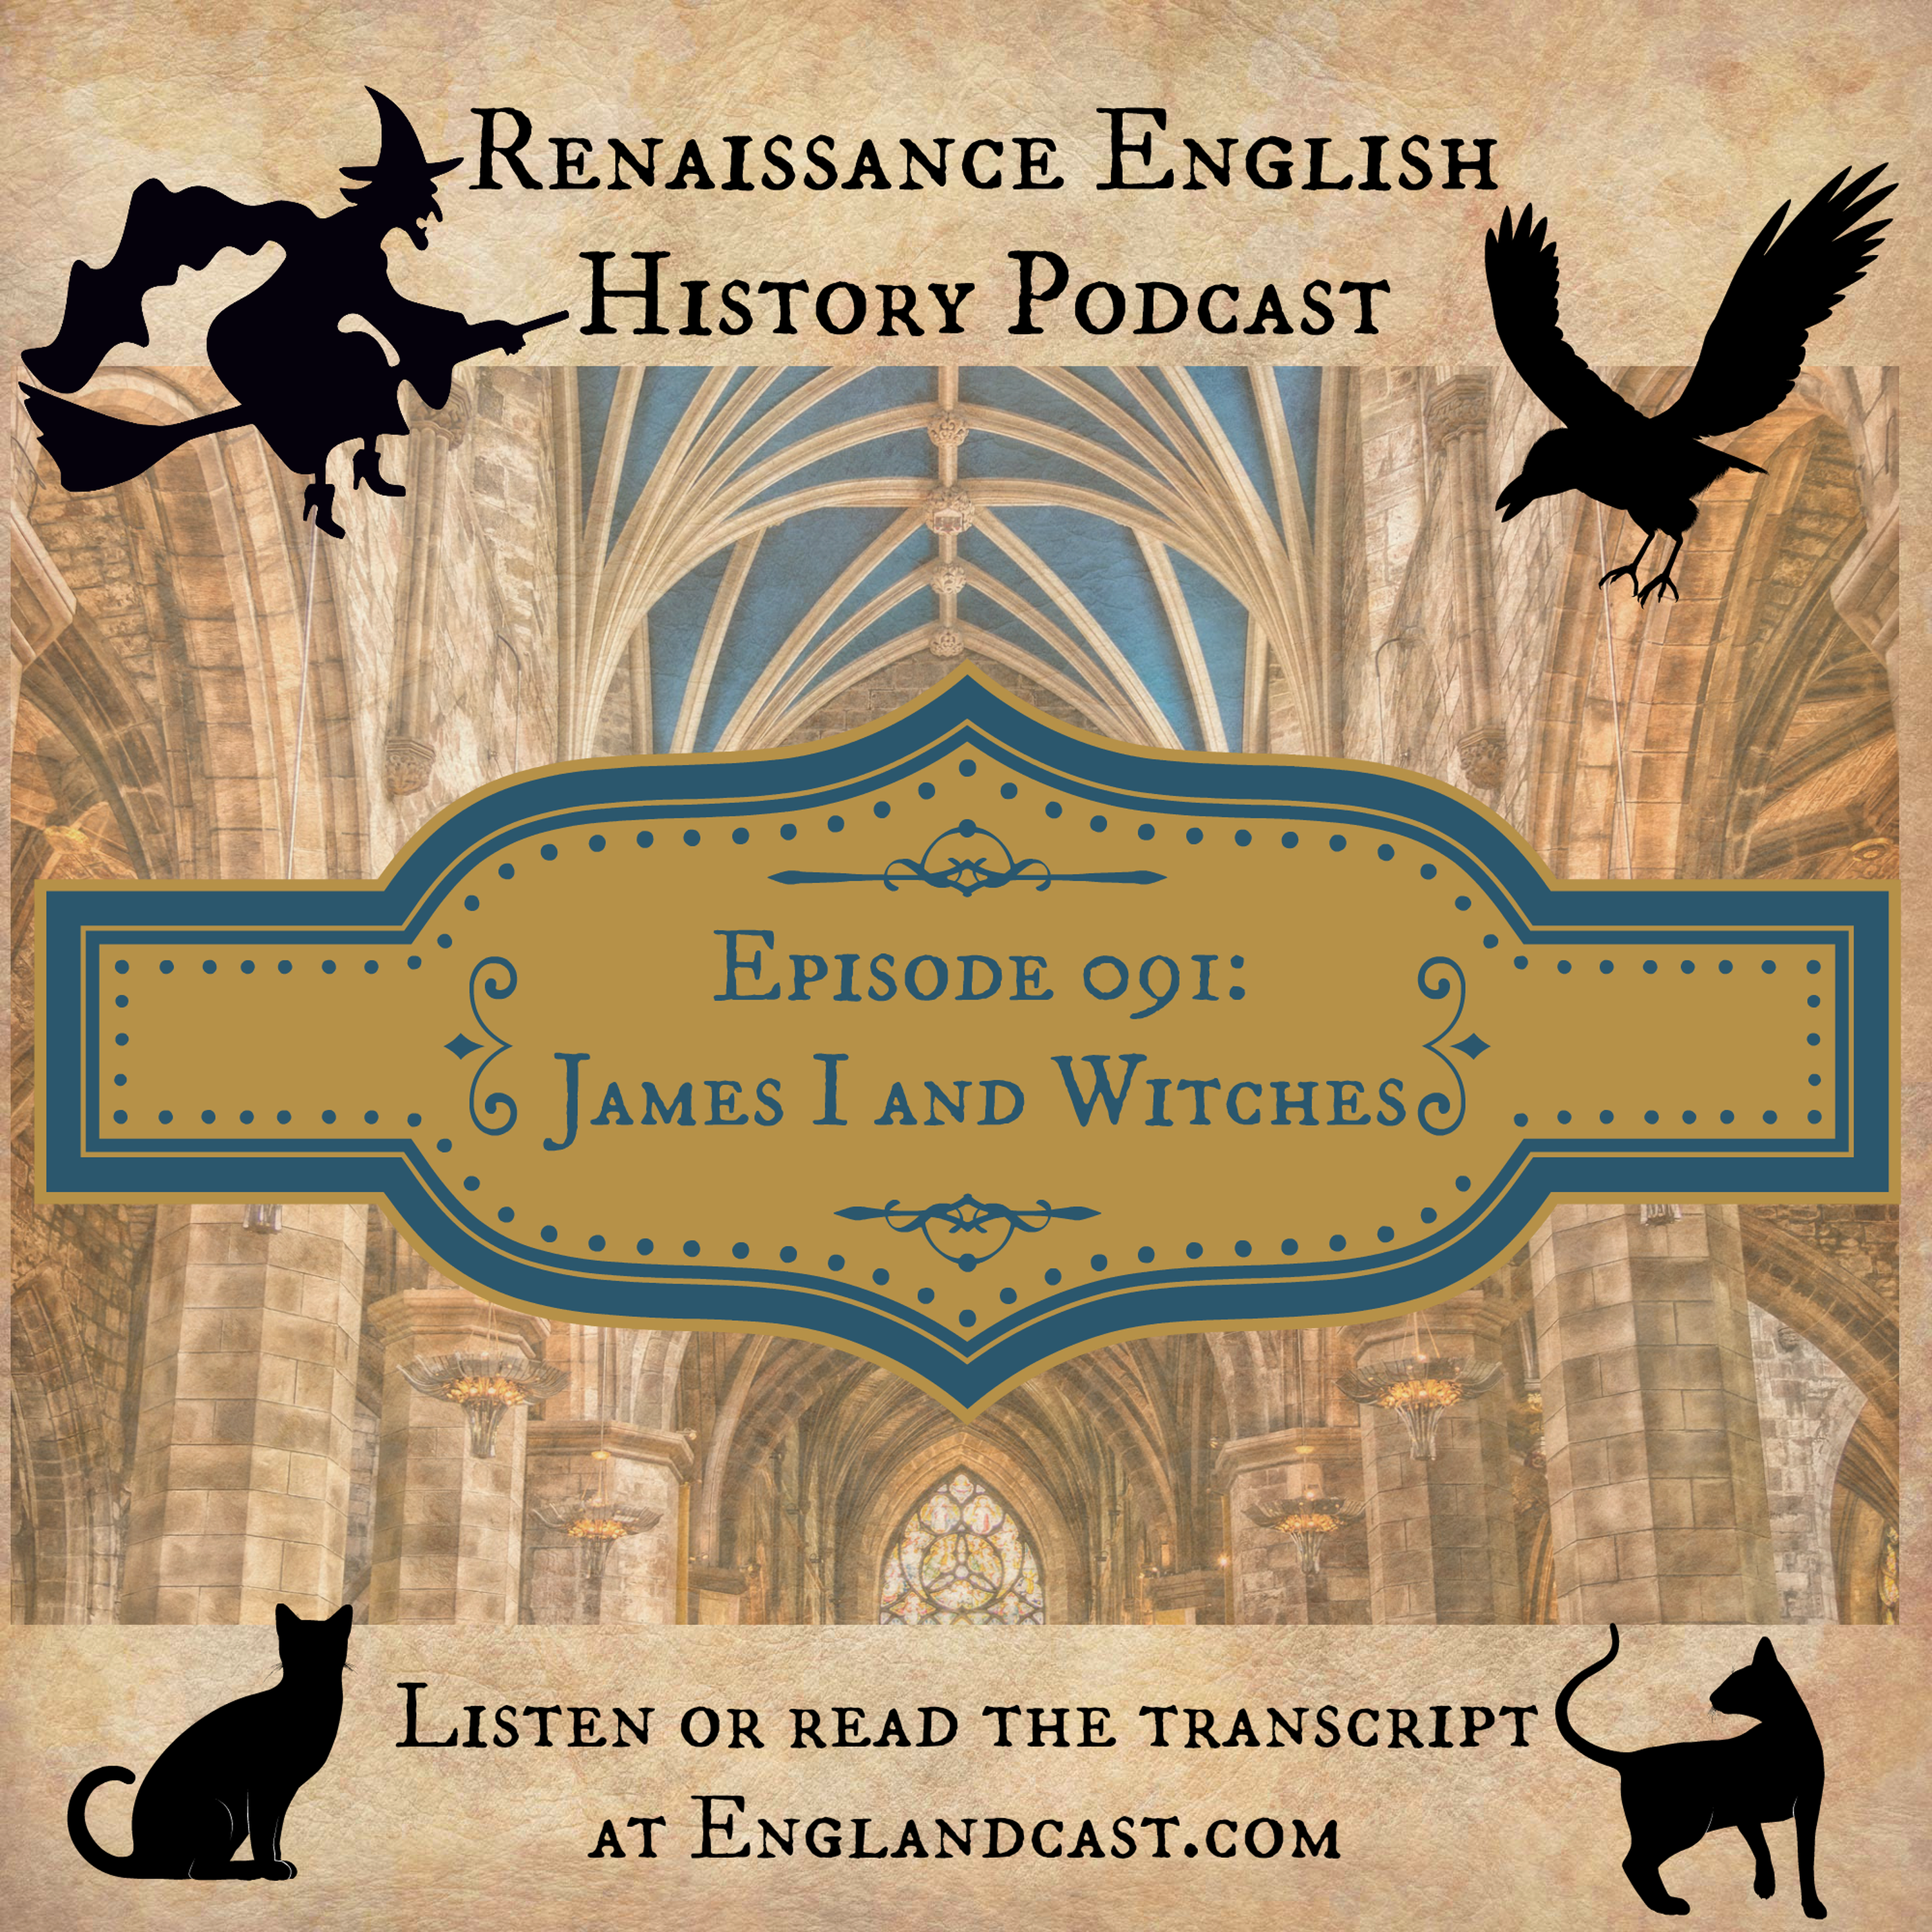 Episode 091: James I and Witchcraft